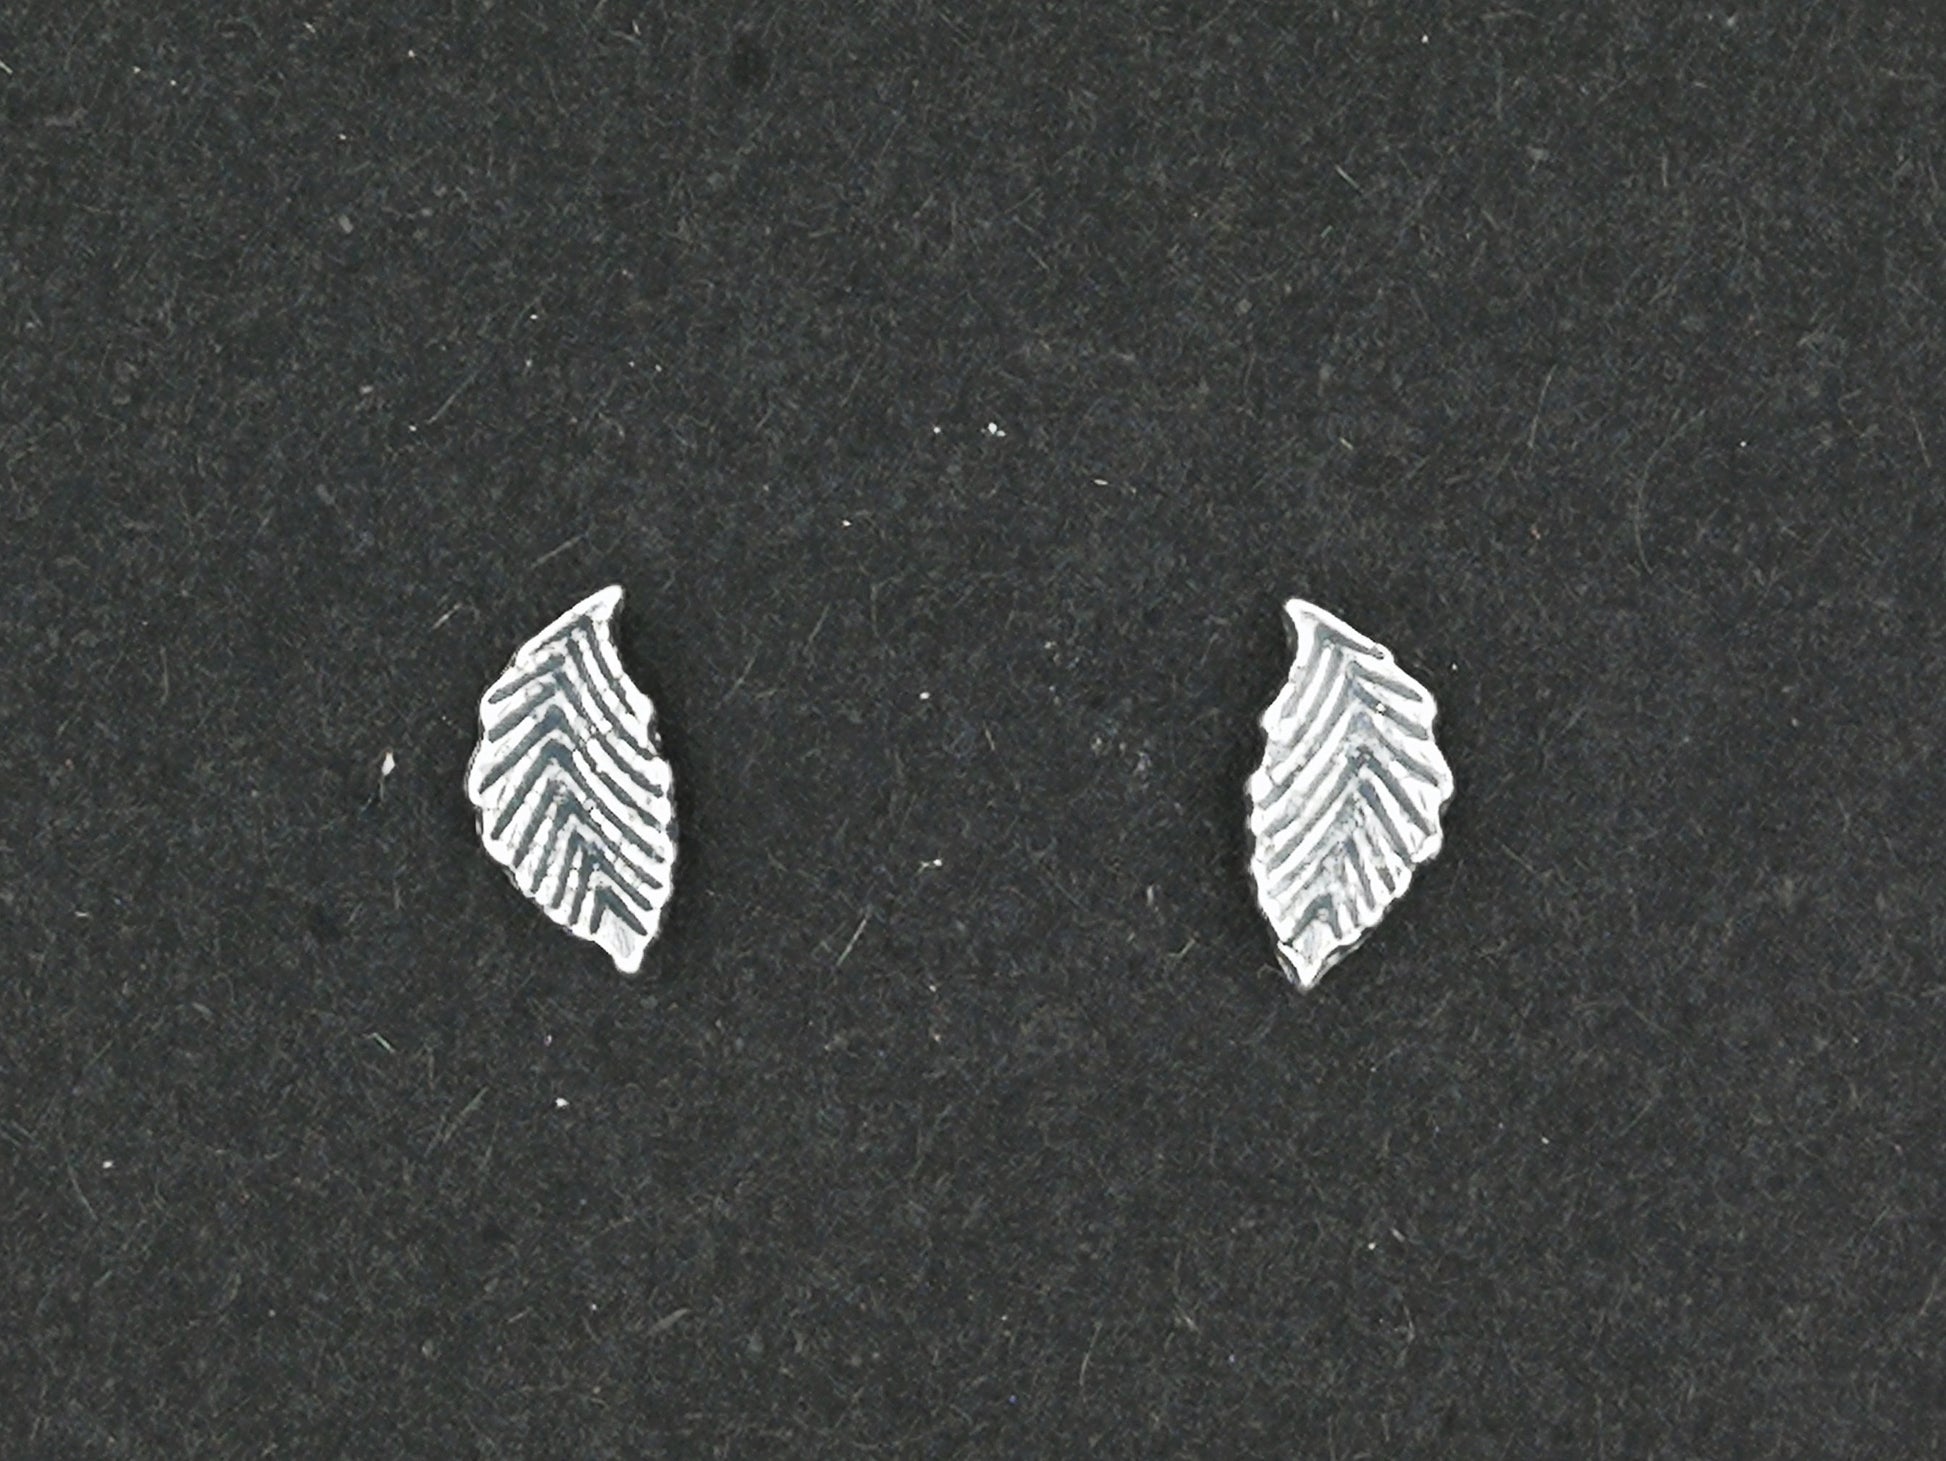 Small Feather Stud Earrings in Sterling Silver, Silver Stud Earrings, Sterling Silver Stud Earrings, Small Feather Stud Earrings, Silver Feather Stud Earrings, Silver Feather Earrings, Silver Feather Jewelry, Siver Feather Jewellery, 925 Feather Studs, 925 Silver Feather Earrings, Silver Dangle Earrings, Silver Animal Earrings, Animal Lover Earrings